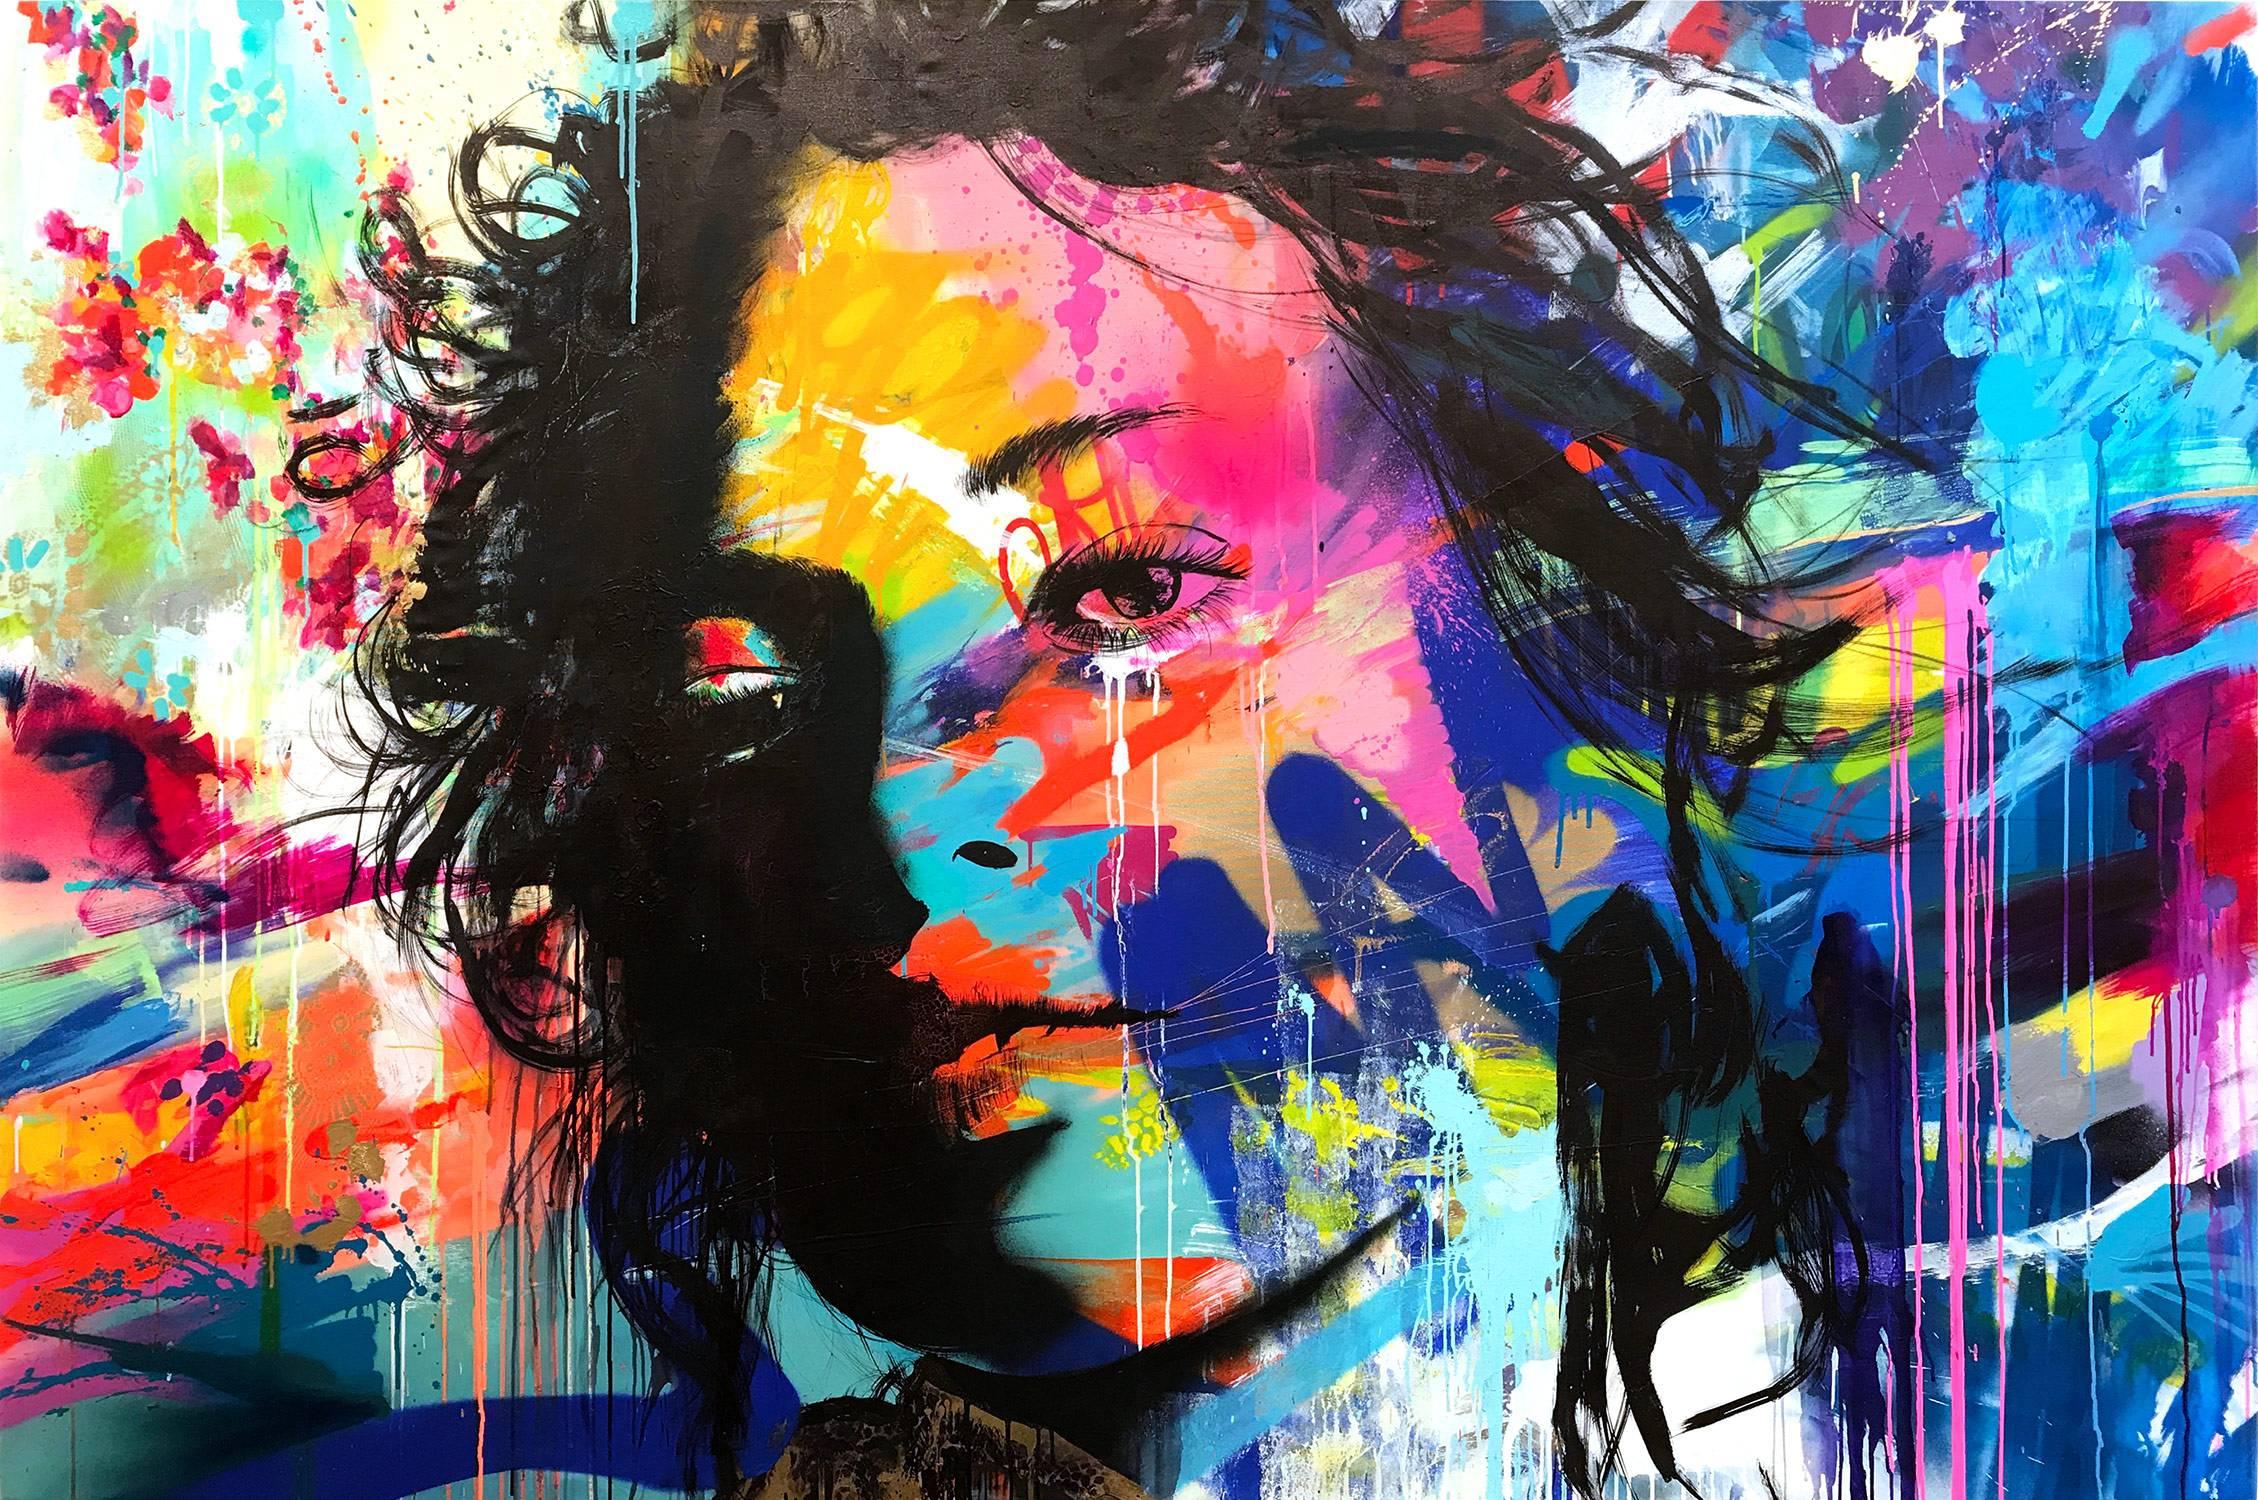 J.M. Robert Portrait Painting - "Les Beaux Jours" The Good Days Colorful, Abstract Street Art, French Art